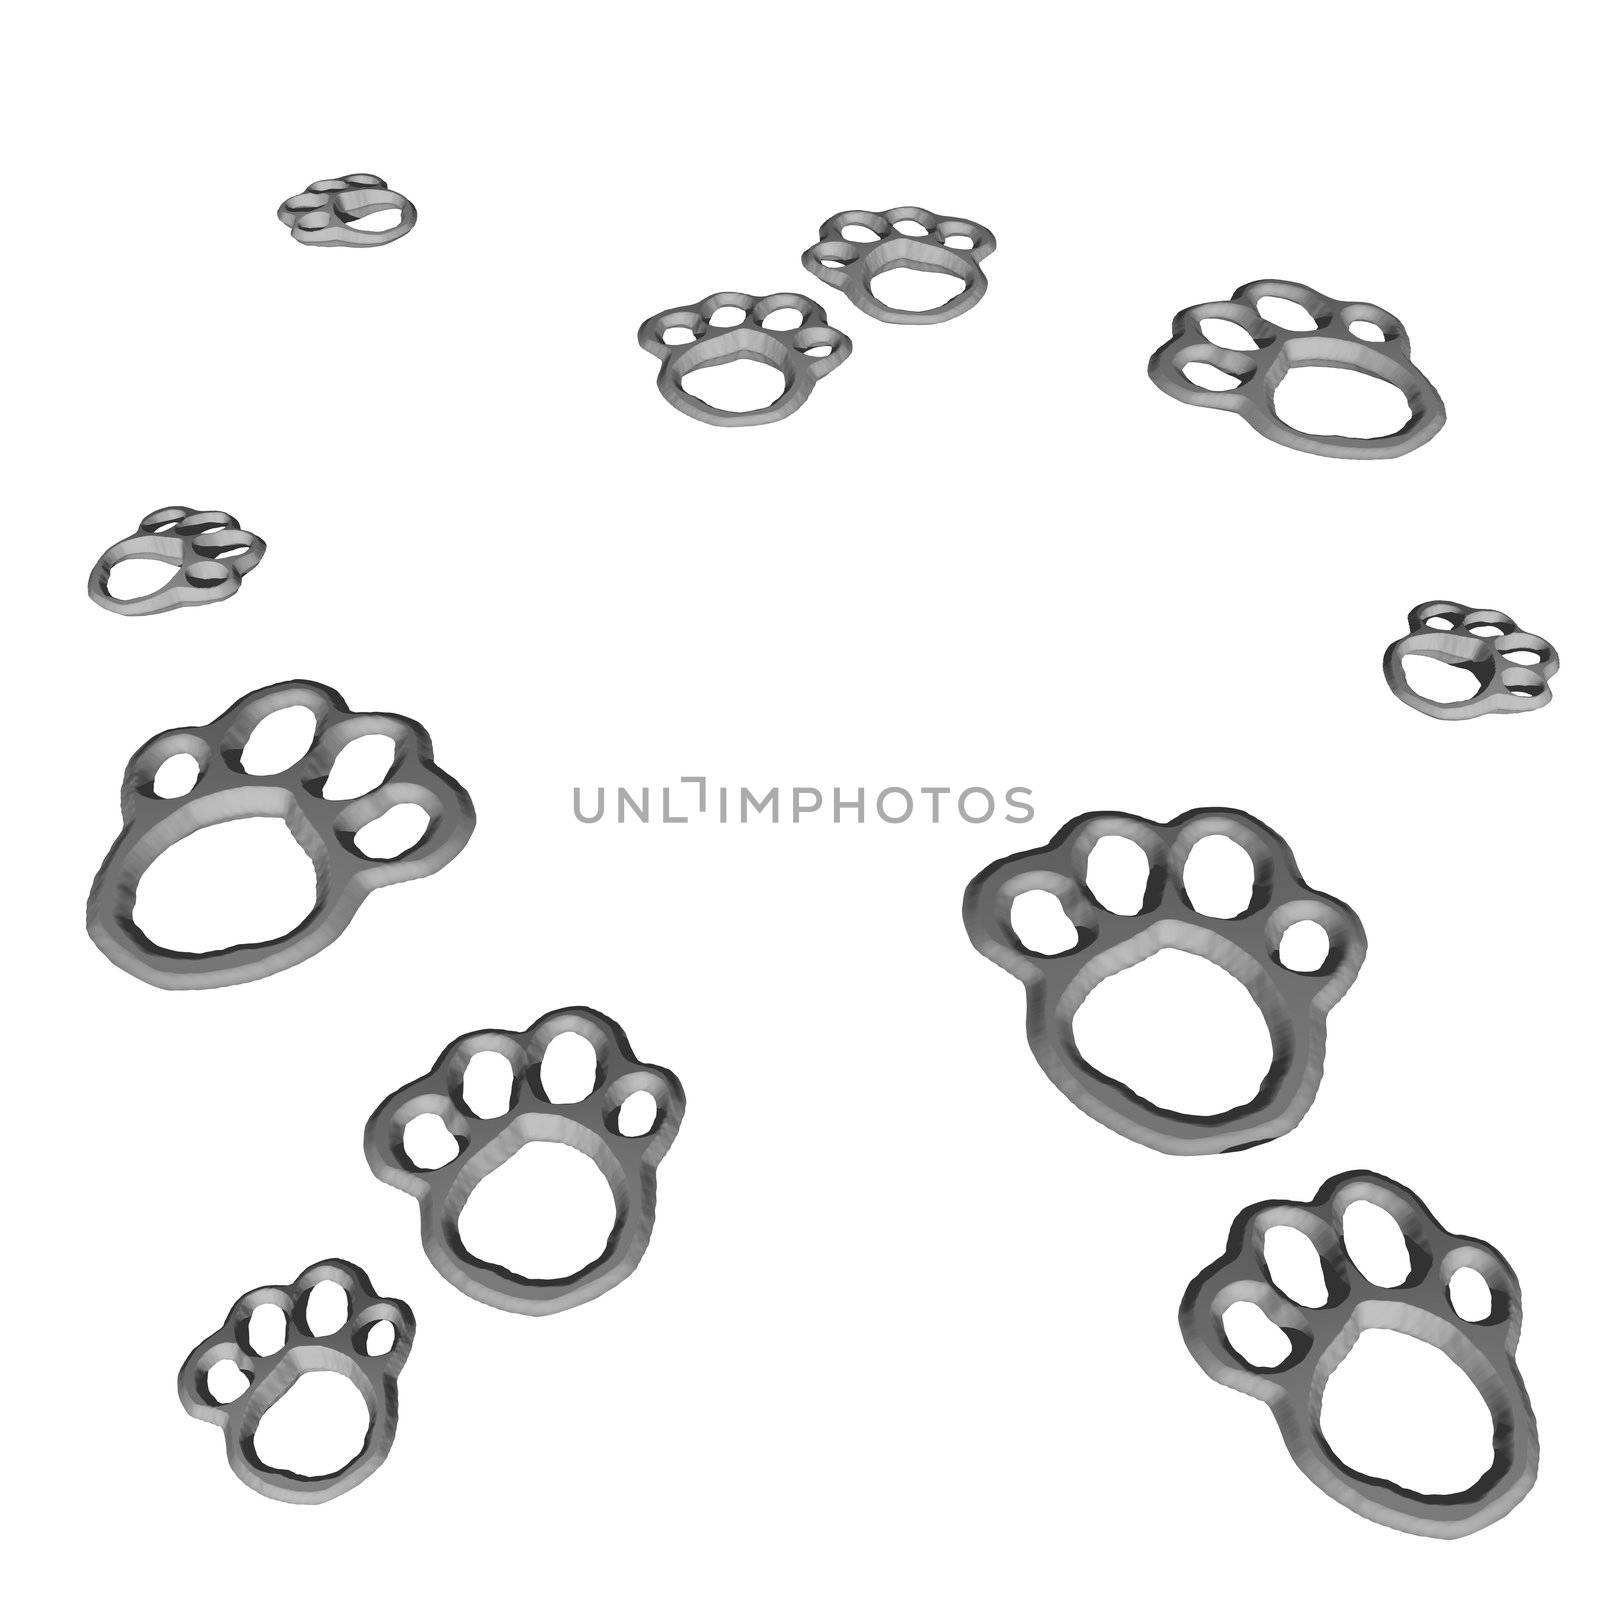 An illustration of animal paws isolated on a white background.